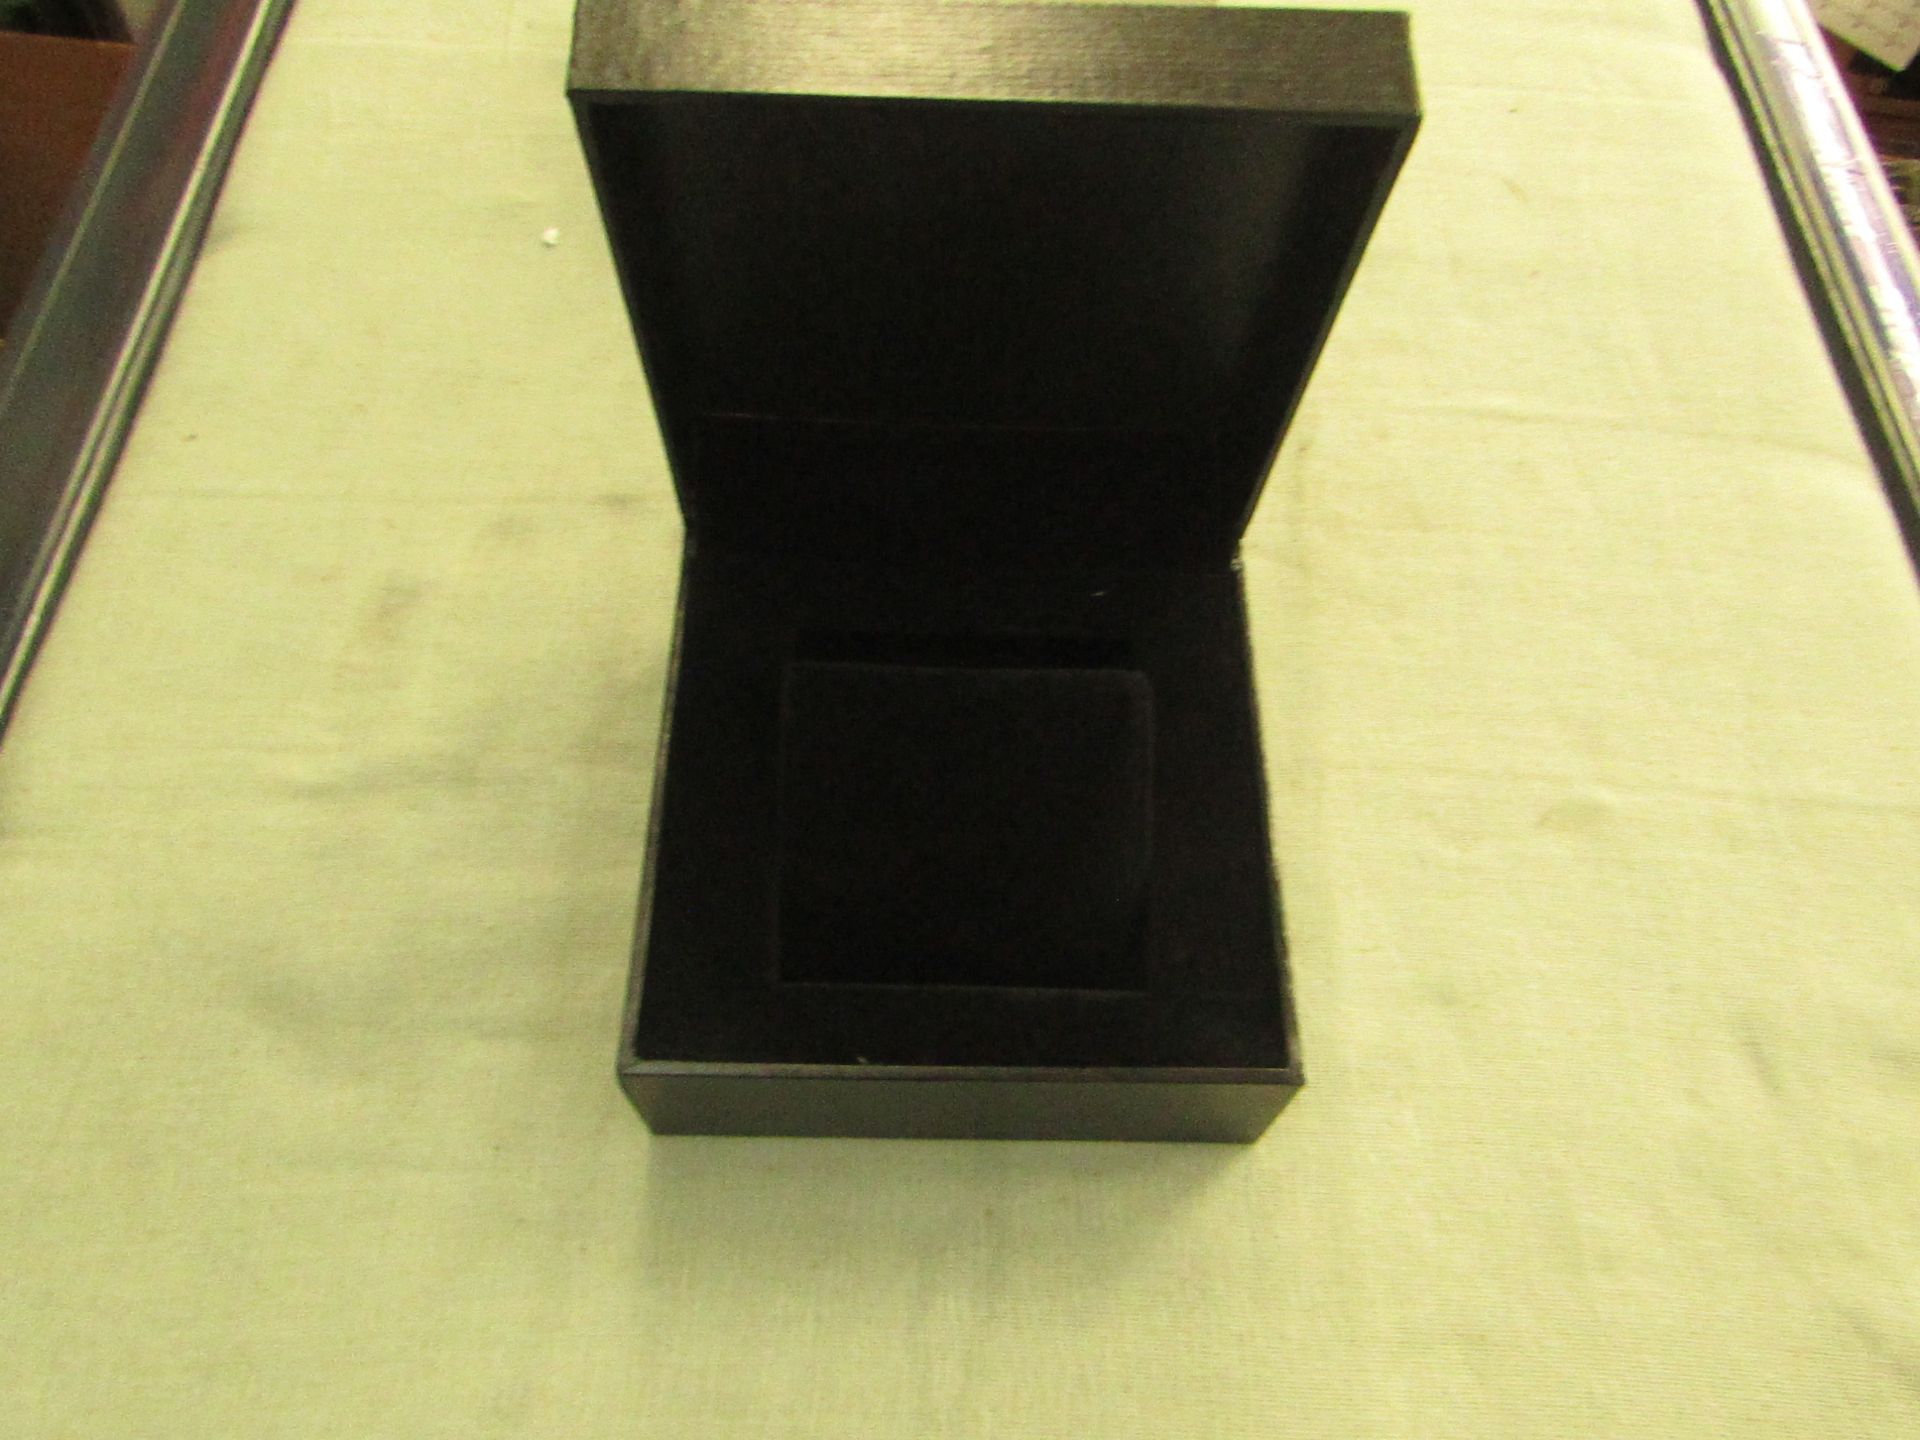 5x Unbranded - Black Jewellery / Watch Boxes - All Unused.